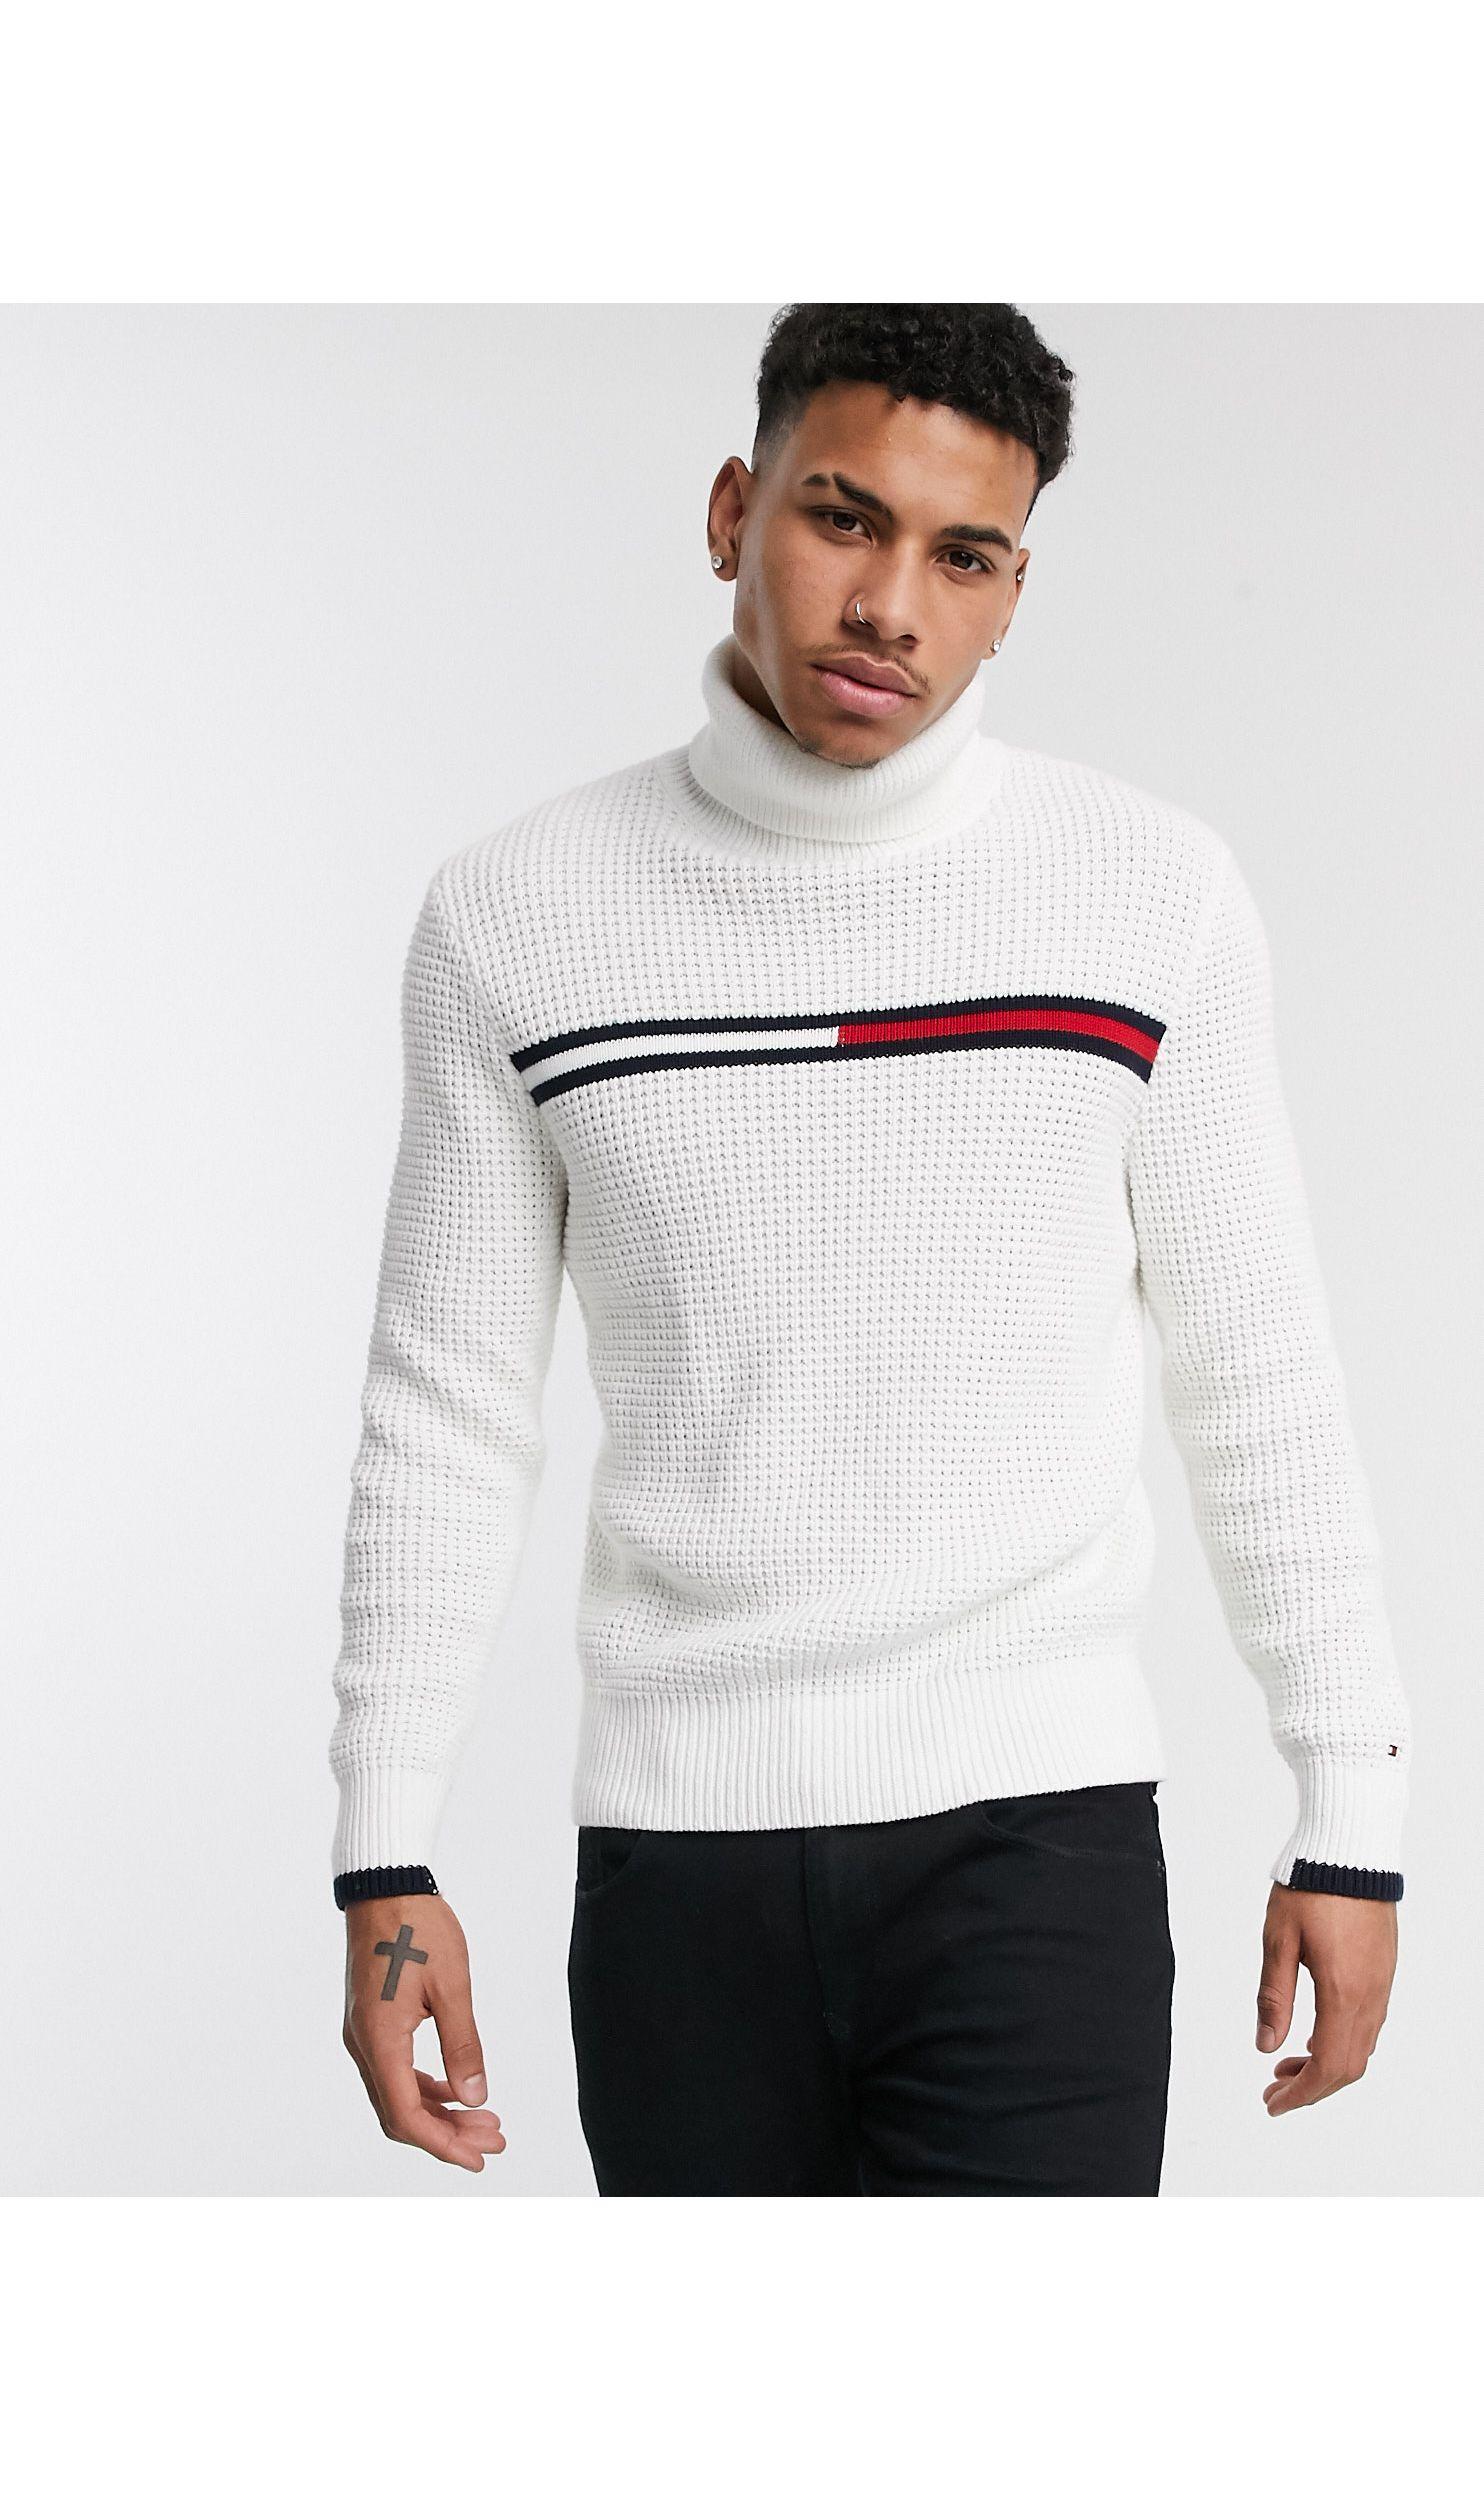 Tommy Hilfiger Trent Knitted Sweater White for Men Lyst